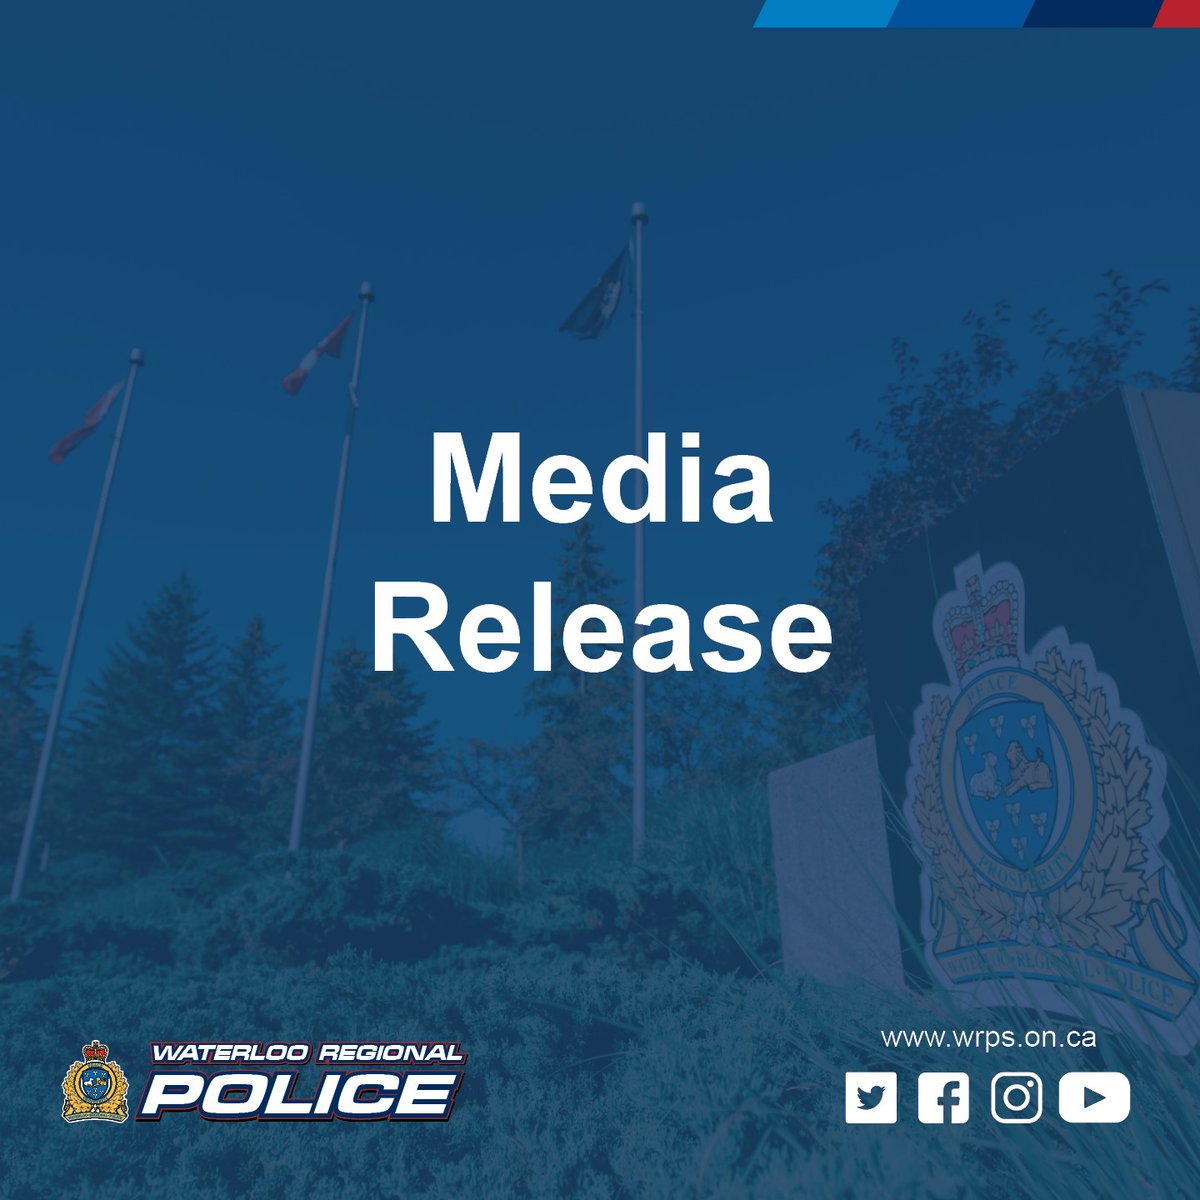 A 27-year-old Waterloo female has been arrested and charged in connection to a hate-motivated incident that took place at a DriveTest Centre in Kitchener.

Call police or @Waterloocrime with any information.

Occ: 23-136663 (907)

Details: bit.ly/3IIXz1d.